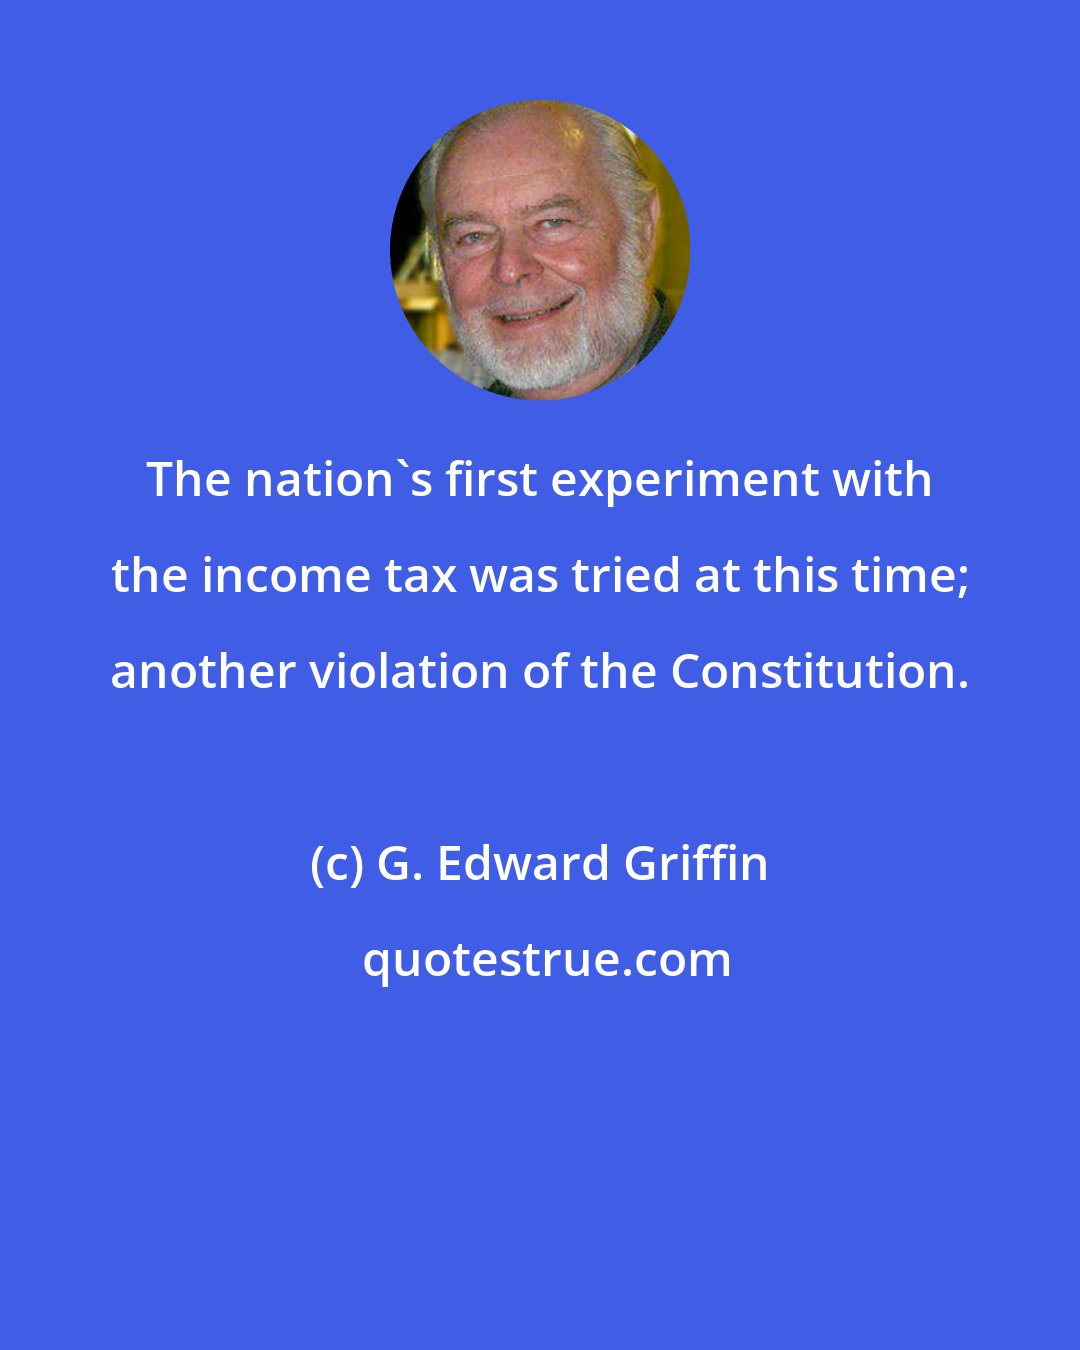 G. Edward Griffin: The nation's first experiment with the income tax was tried at this time; another violation of the Constitution.